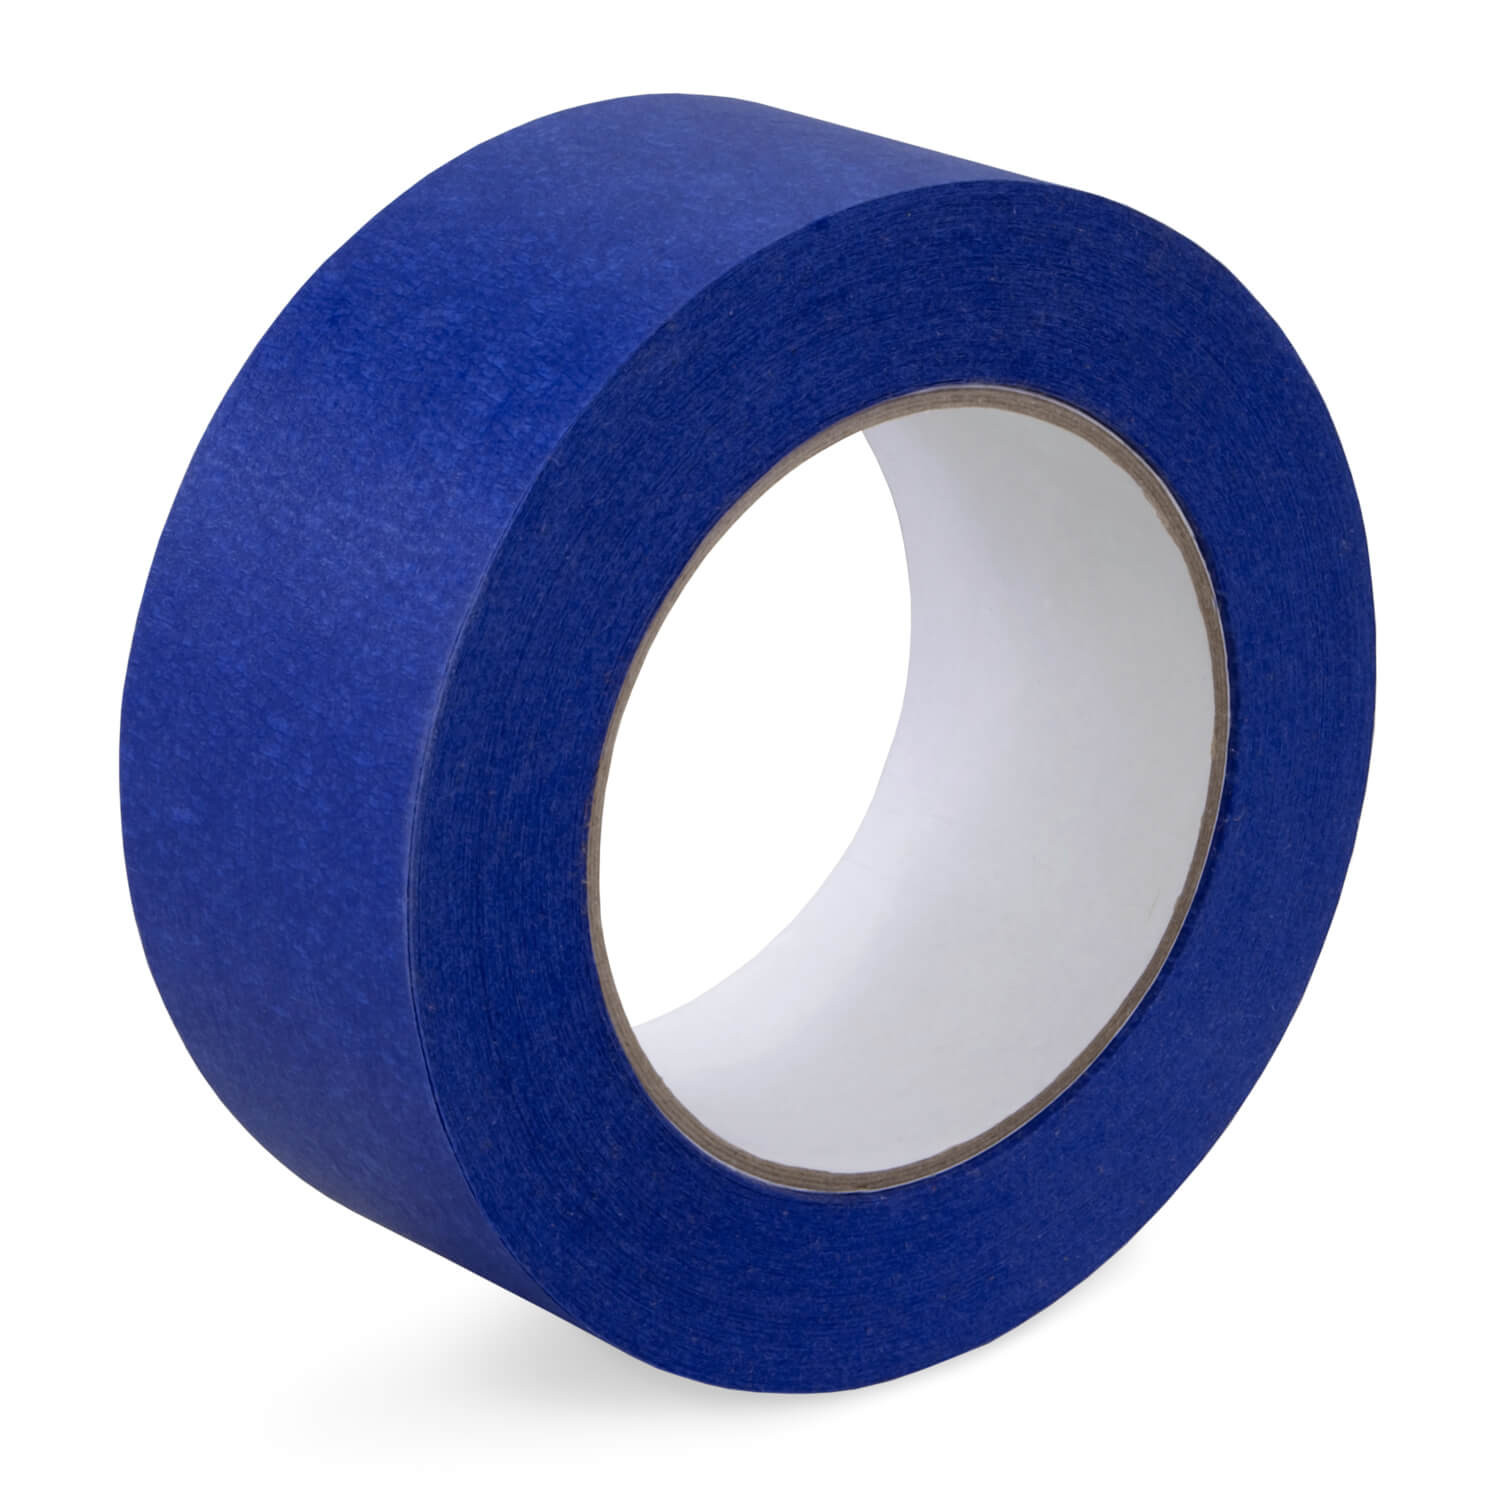 2 x 60 yards Blue Painters Tape for Painting, Natural Rubber buy in stock  in U.S. in IDL Packaging